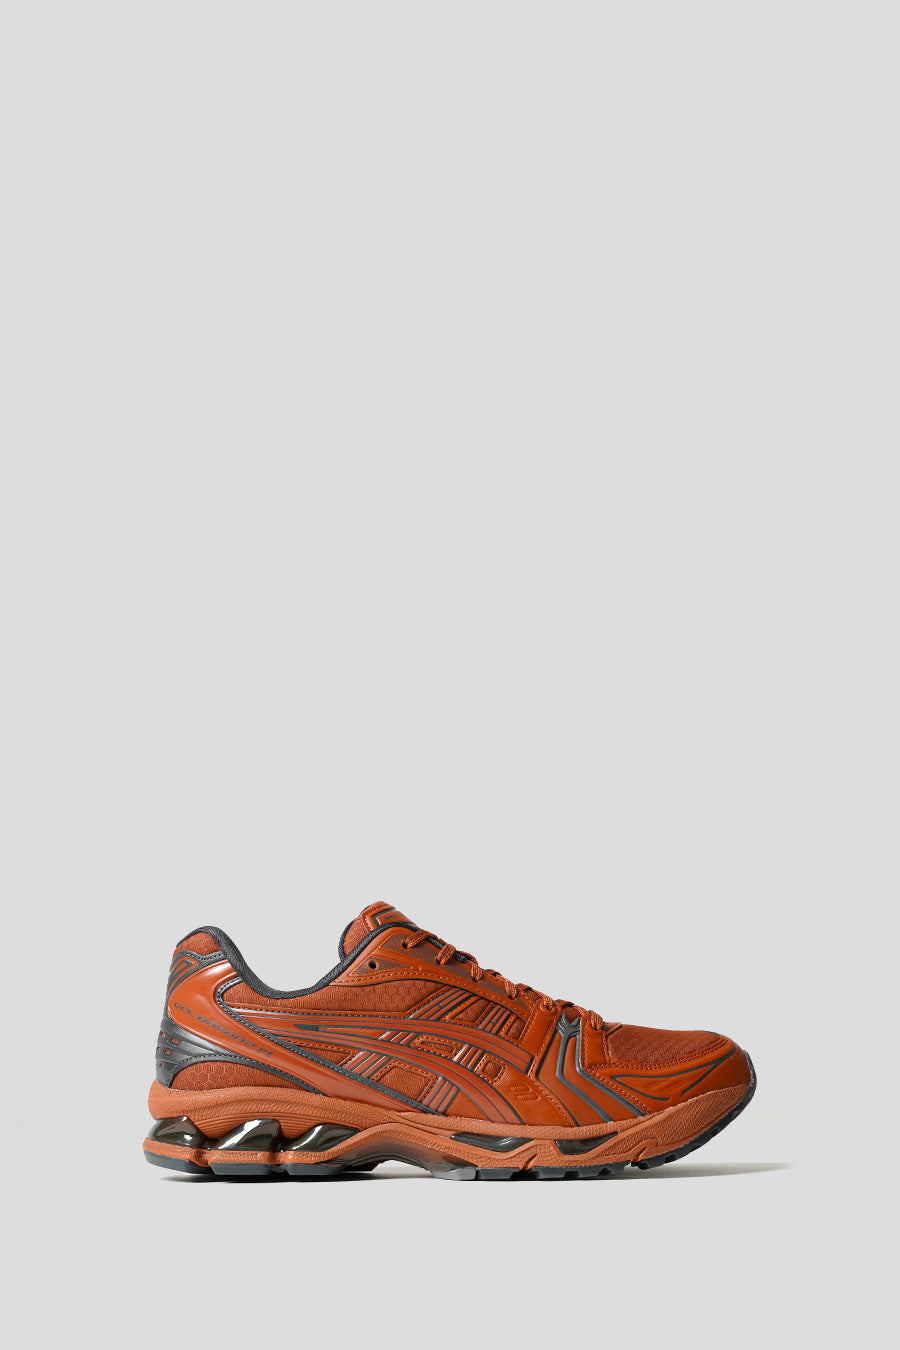 Asics - SNEAKERS KAYANO 14 RUSTY BROWN ET GRAPHITE GREY - LE LABO STORE